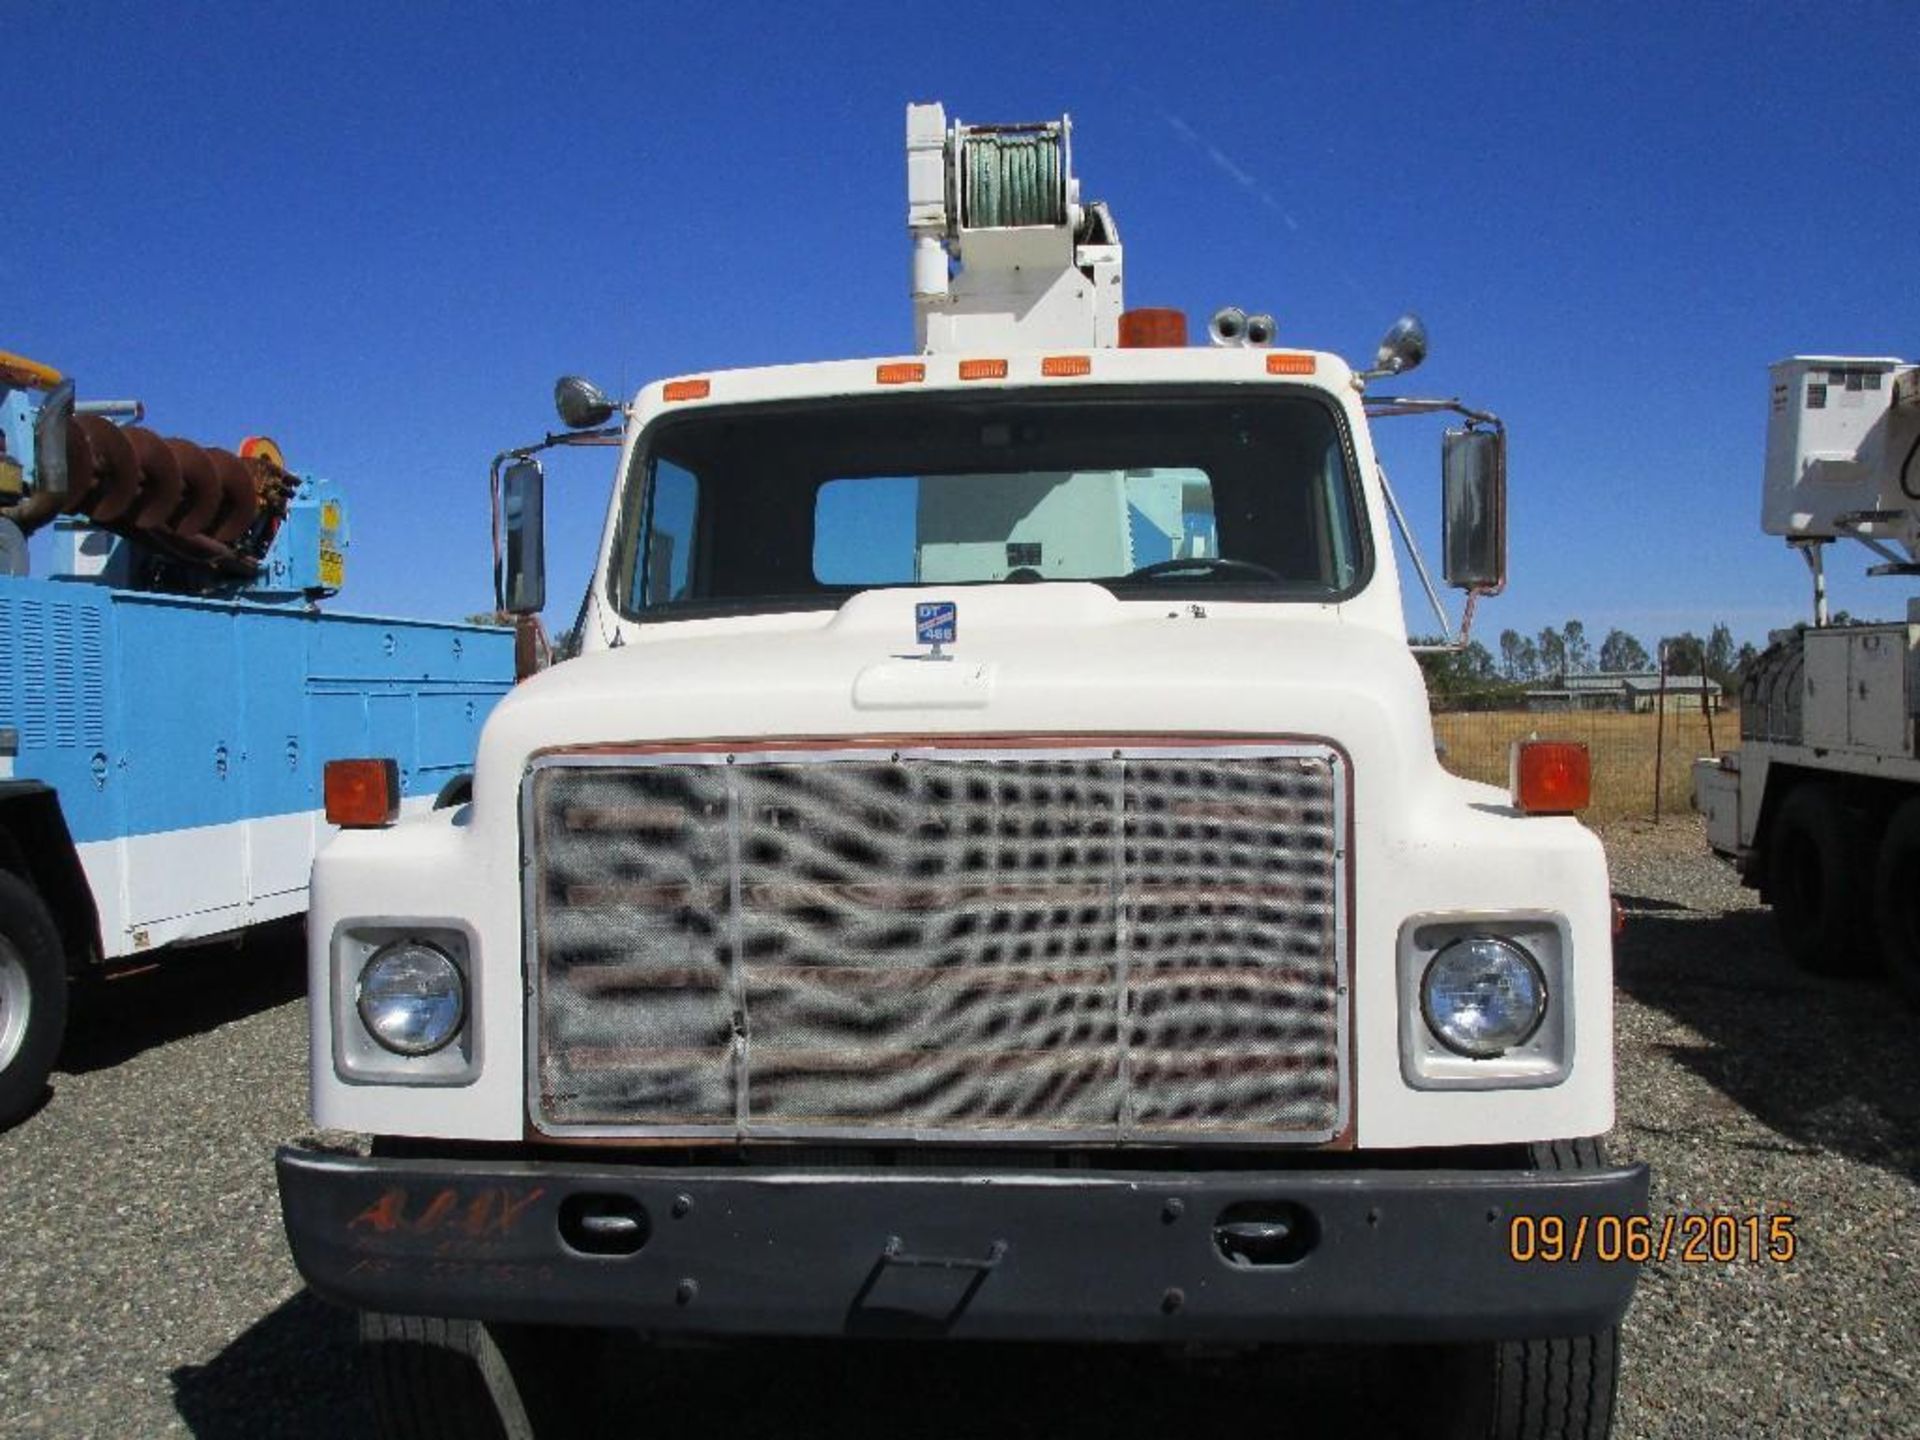 VIN 1HTLKTVR4FHA48391 LIC  20,000lb capacity with upper controls 62842 miles air brakes - Image 2 of 18